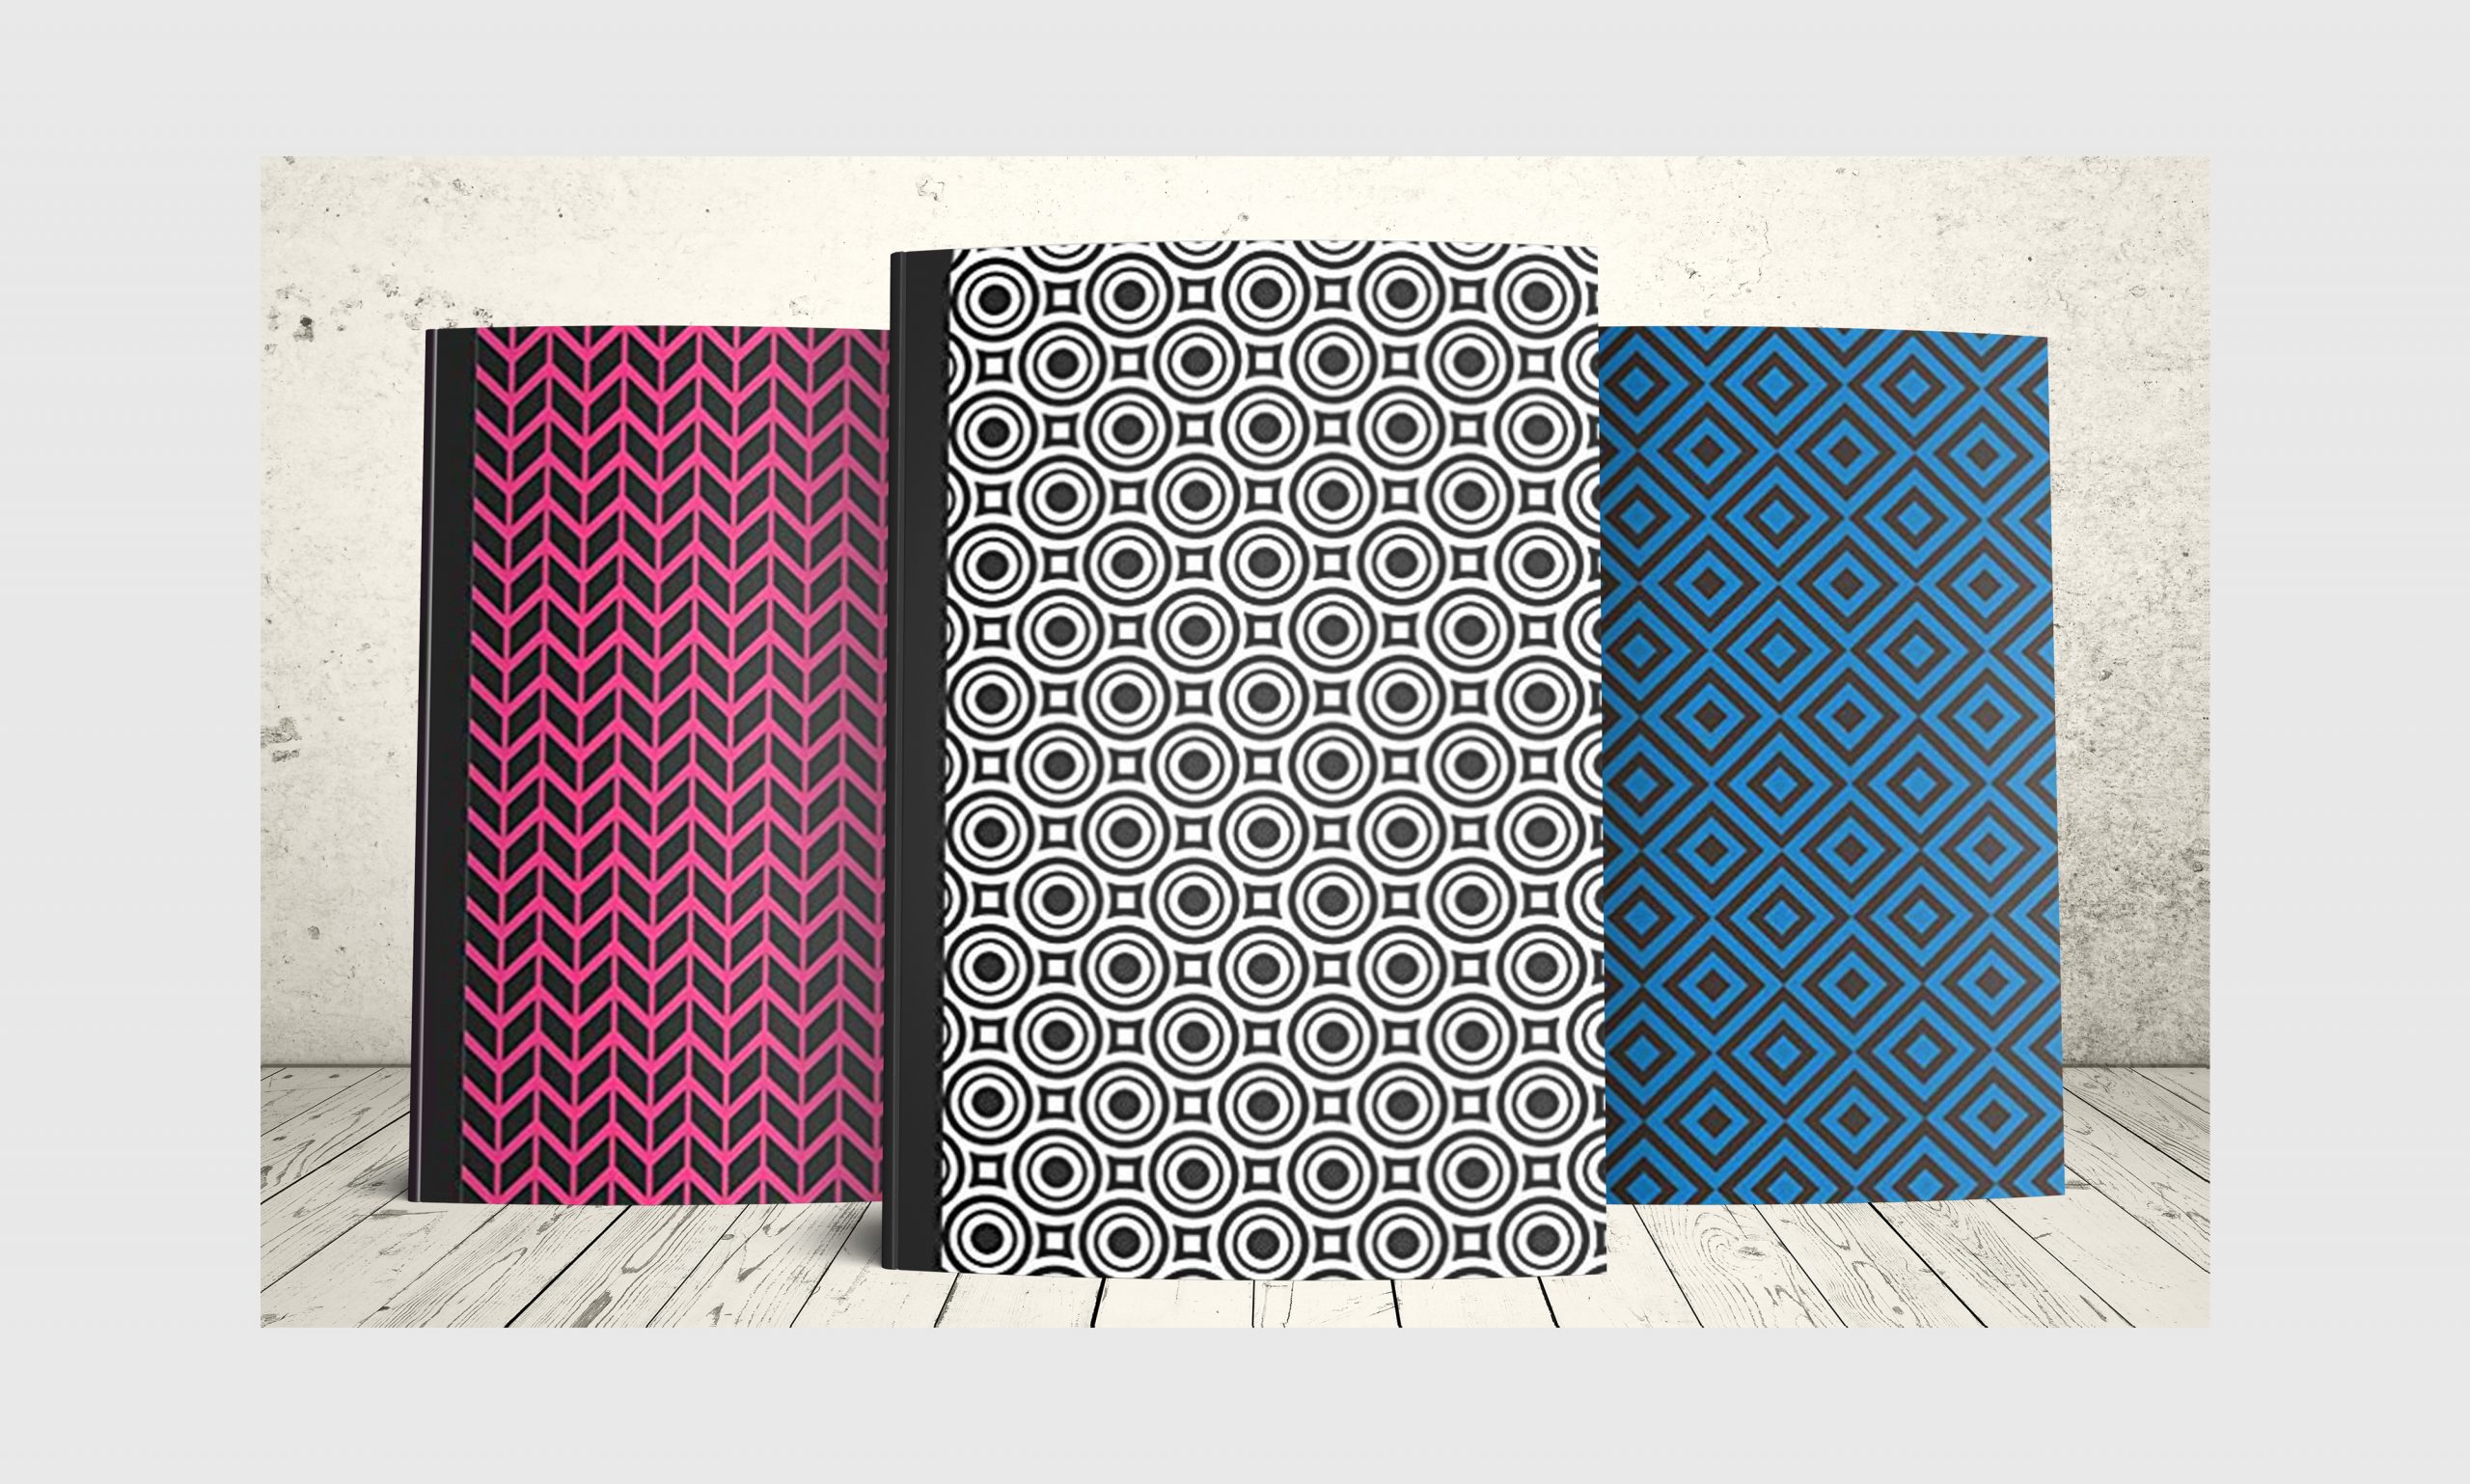 Three journal notebooks with geometric designs on the cover in pink and black, blue and black and white and black.